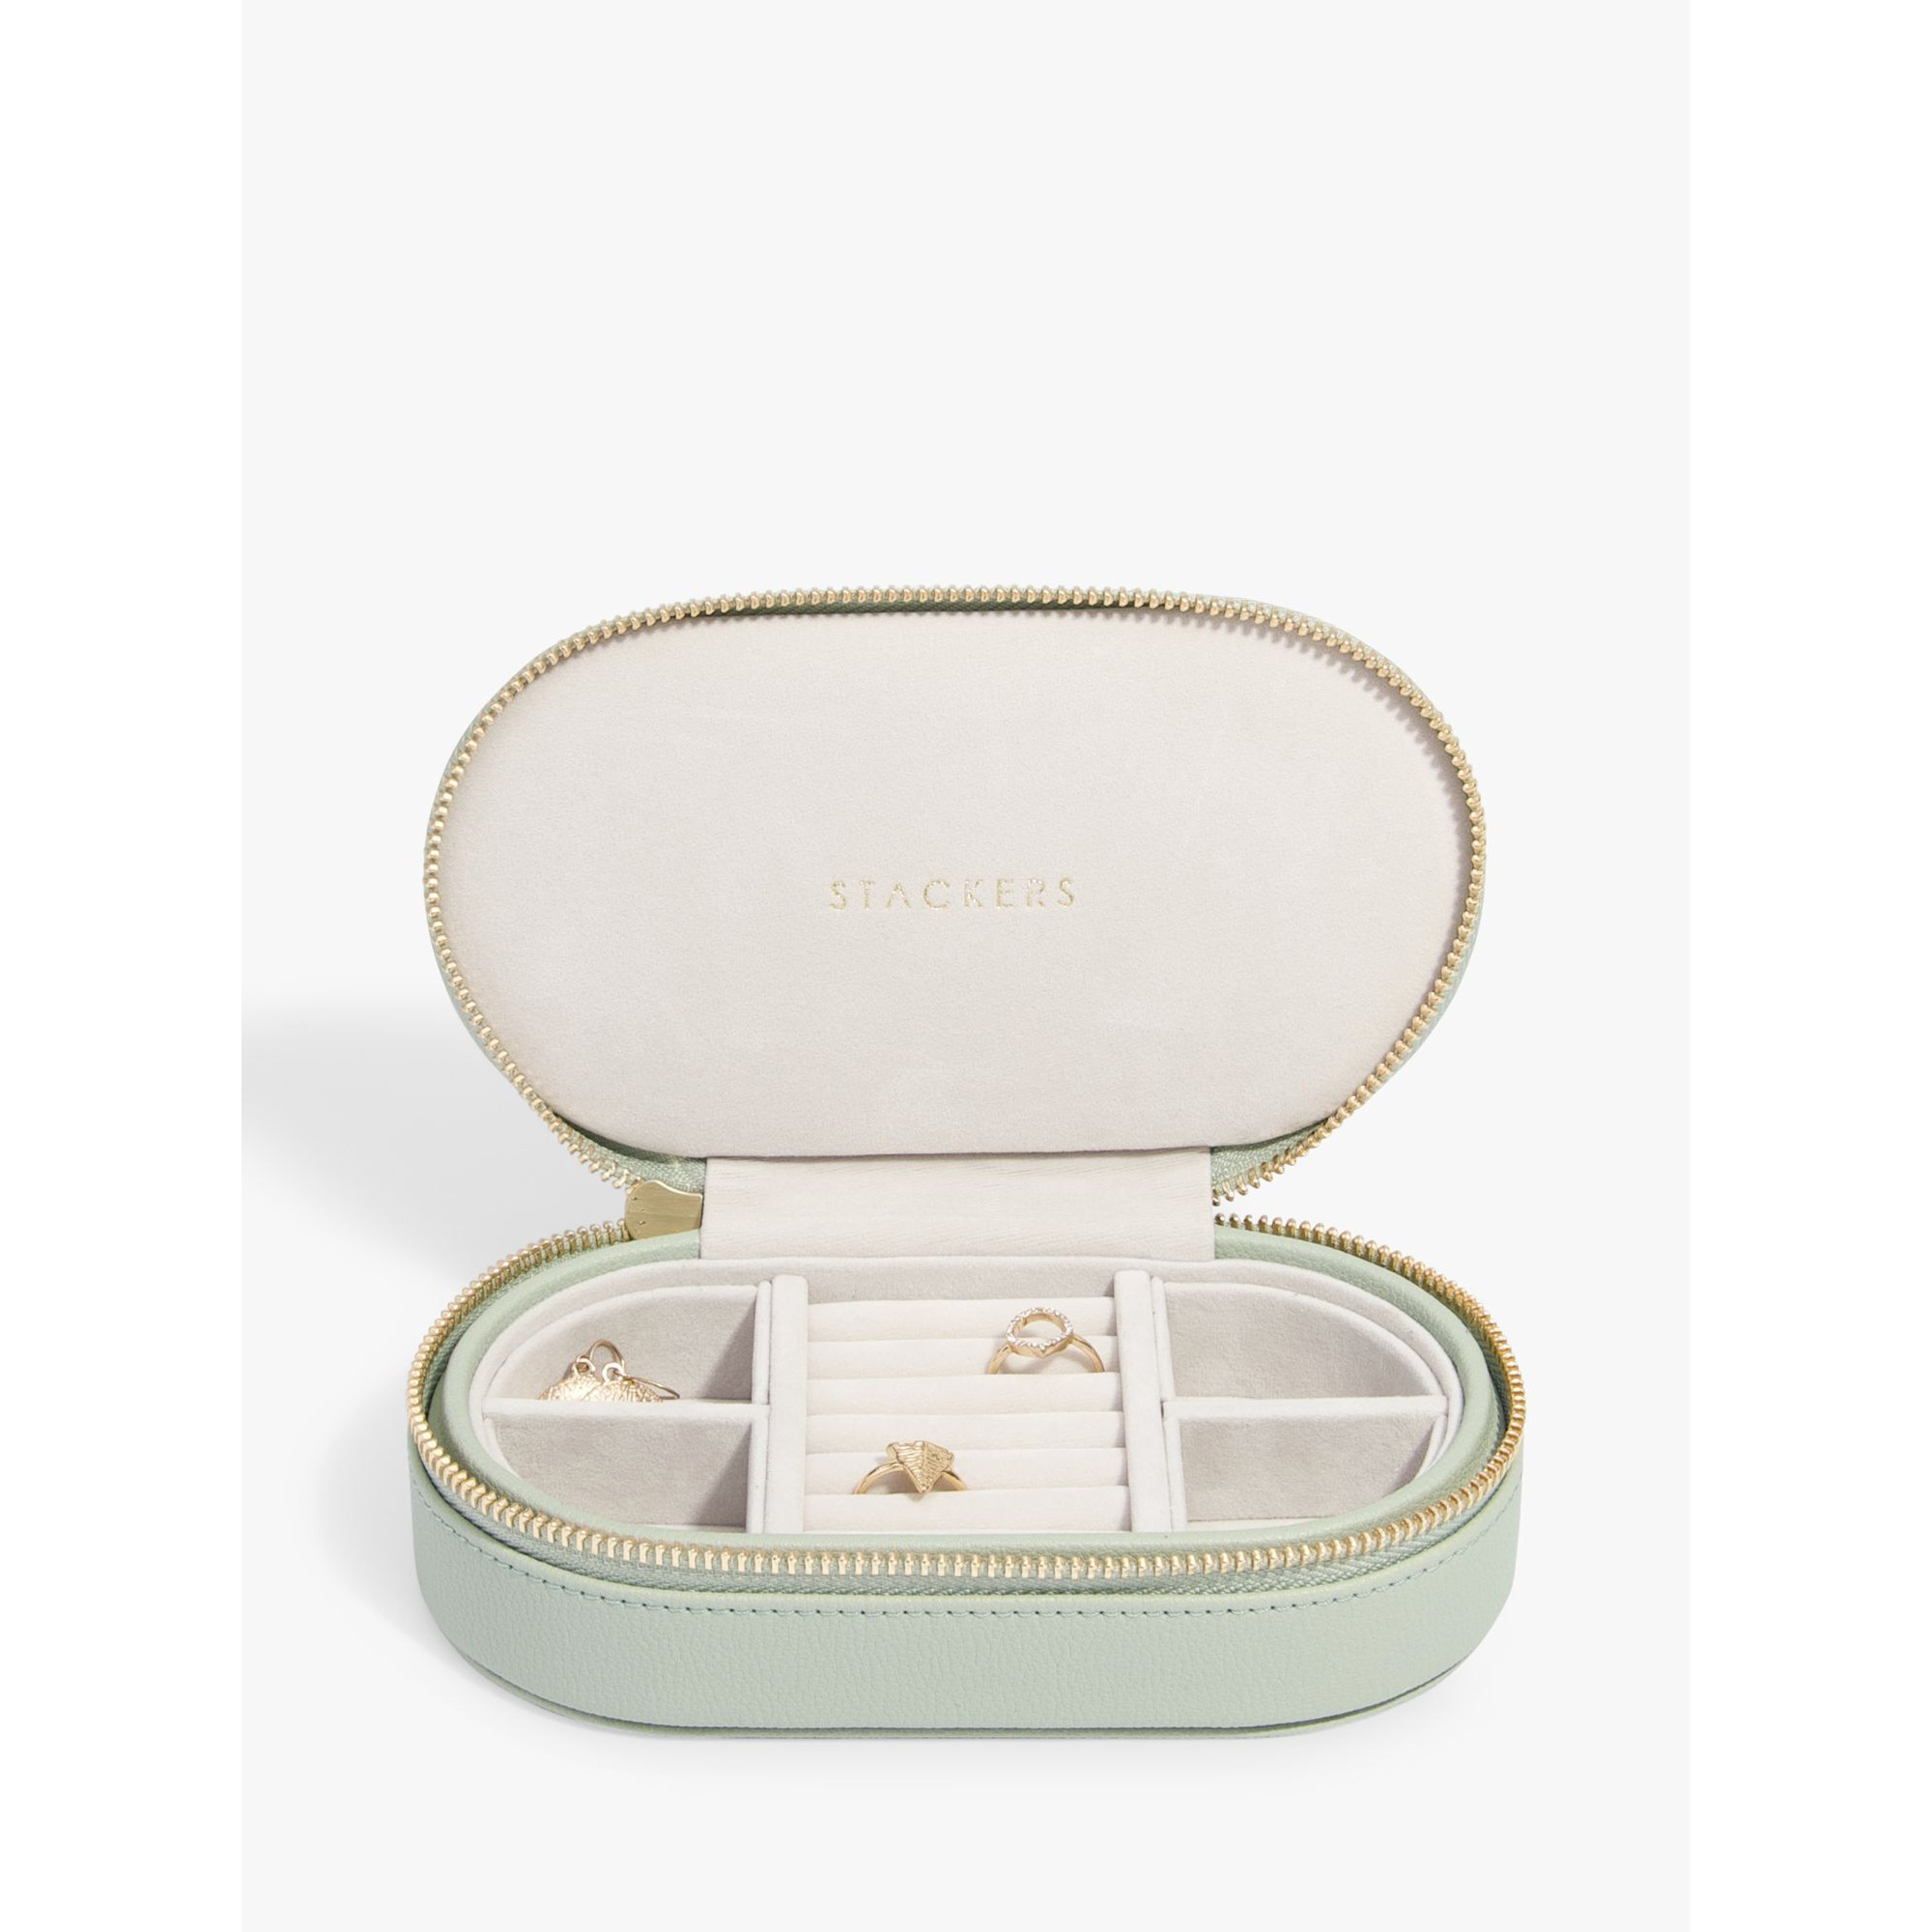 Stackers Oval Travel Jewellery Case - image 1